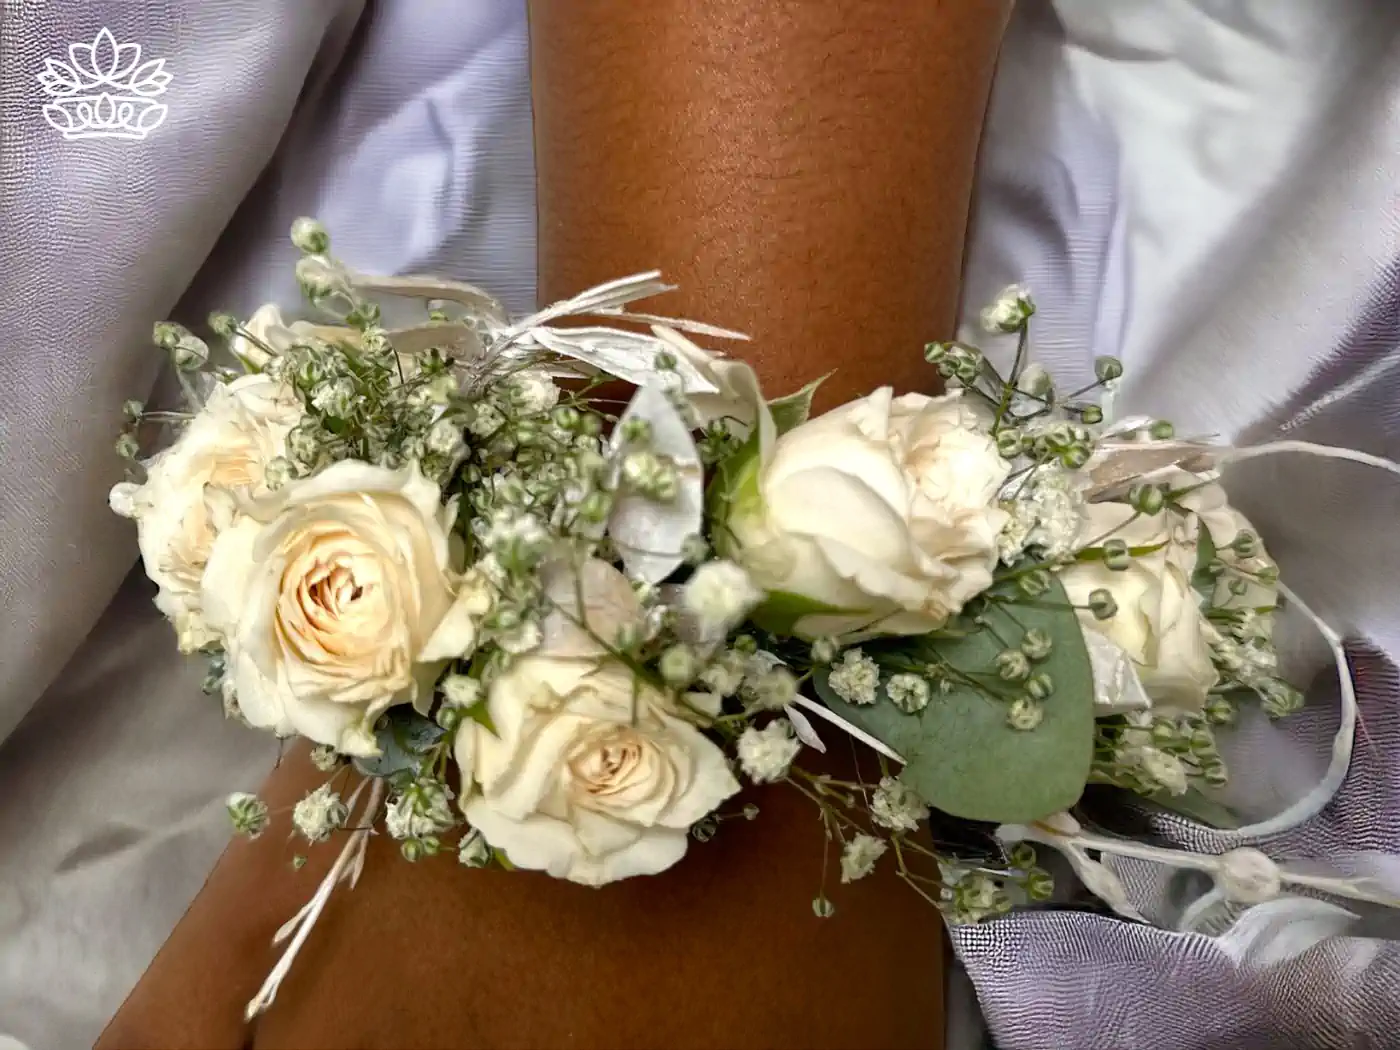 Elegant wrist corsage featuring creamy white roses interspersed with delicate baby's breath and soft green foliage, all tied with a thin white ribbon, gracefully worn against a silky silver fabric. Fabulous Flowers and Gifts - Matric Dance. Delivered with Heart.